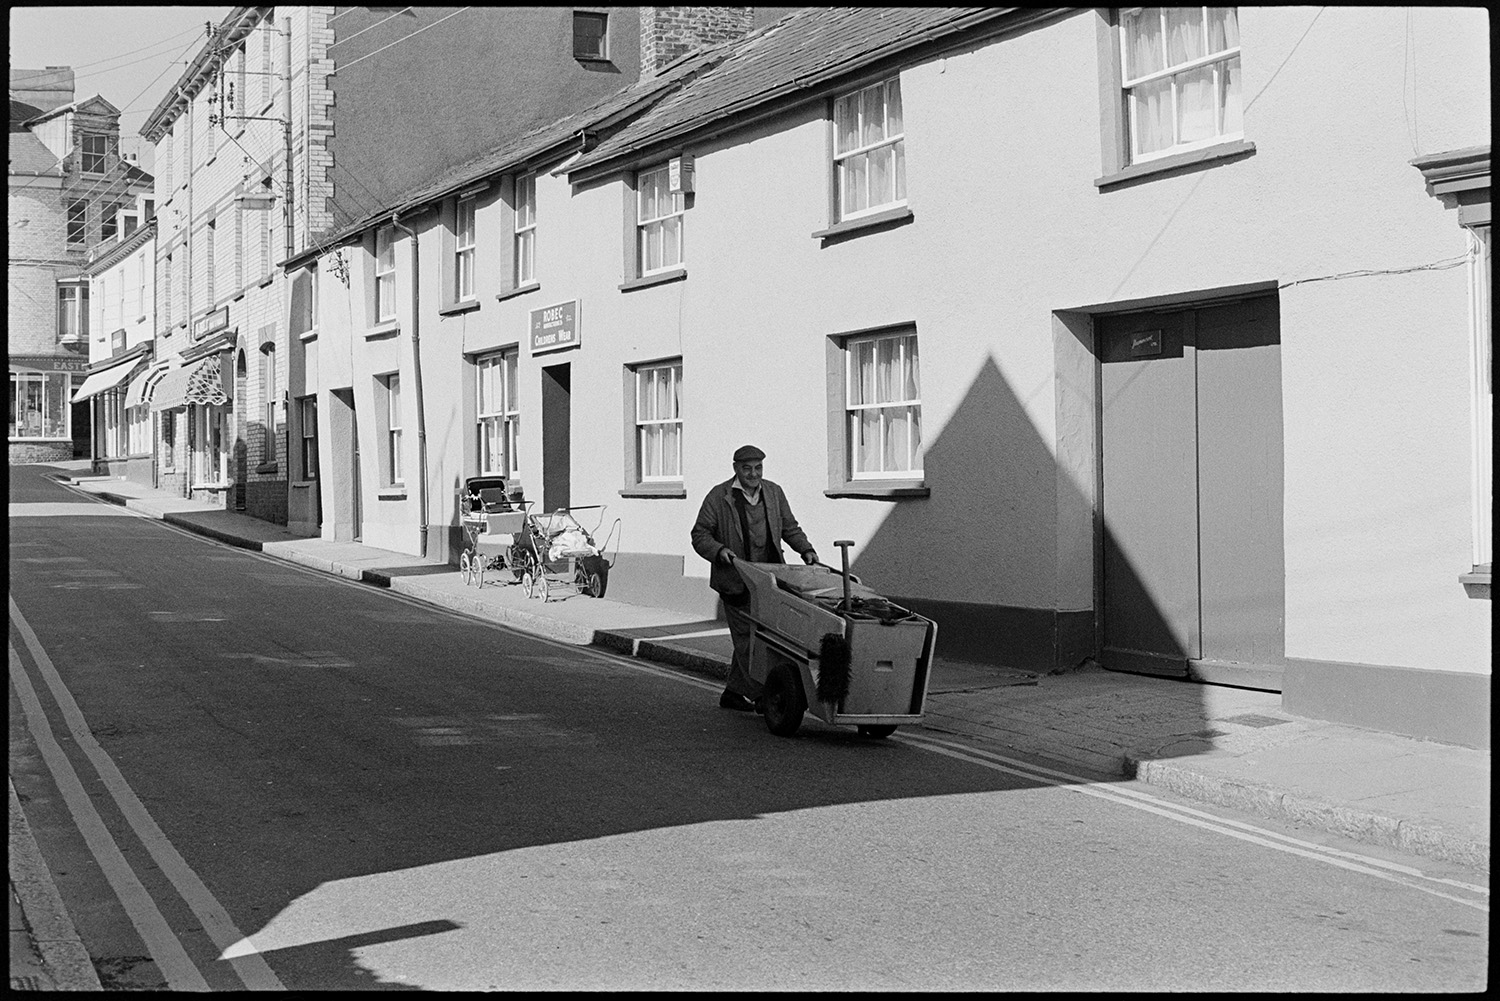 Street scenes with postwoman road sweeper and passers by. 
[A man pushing a road sweeper or street cleaner along a street in Torrington. Shop awnings can be seen in the background and two prams are parked outside Robec children's wear shop.]